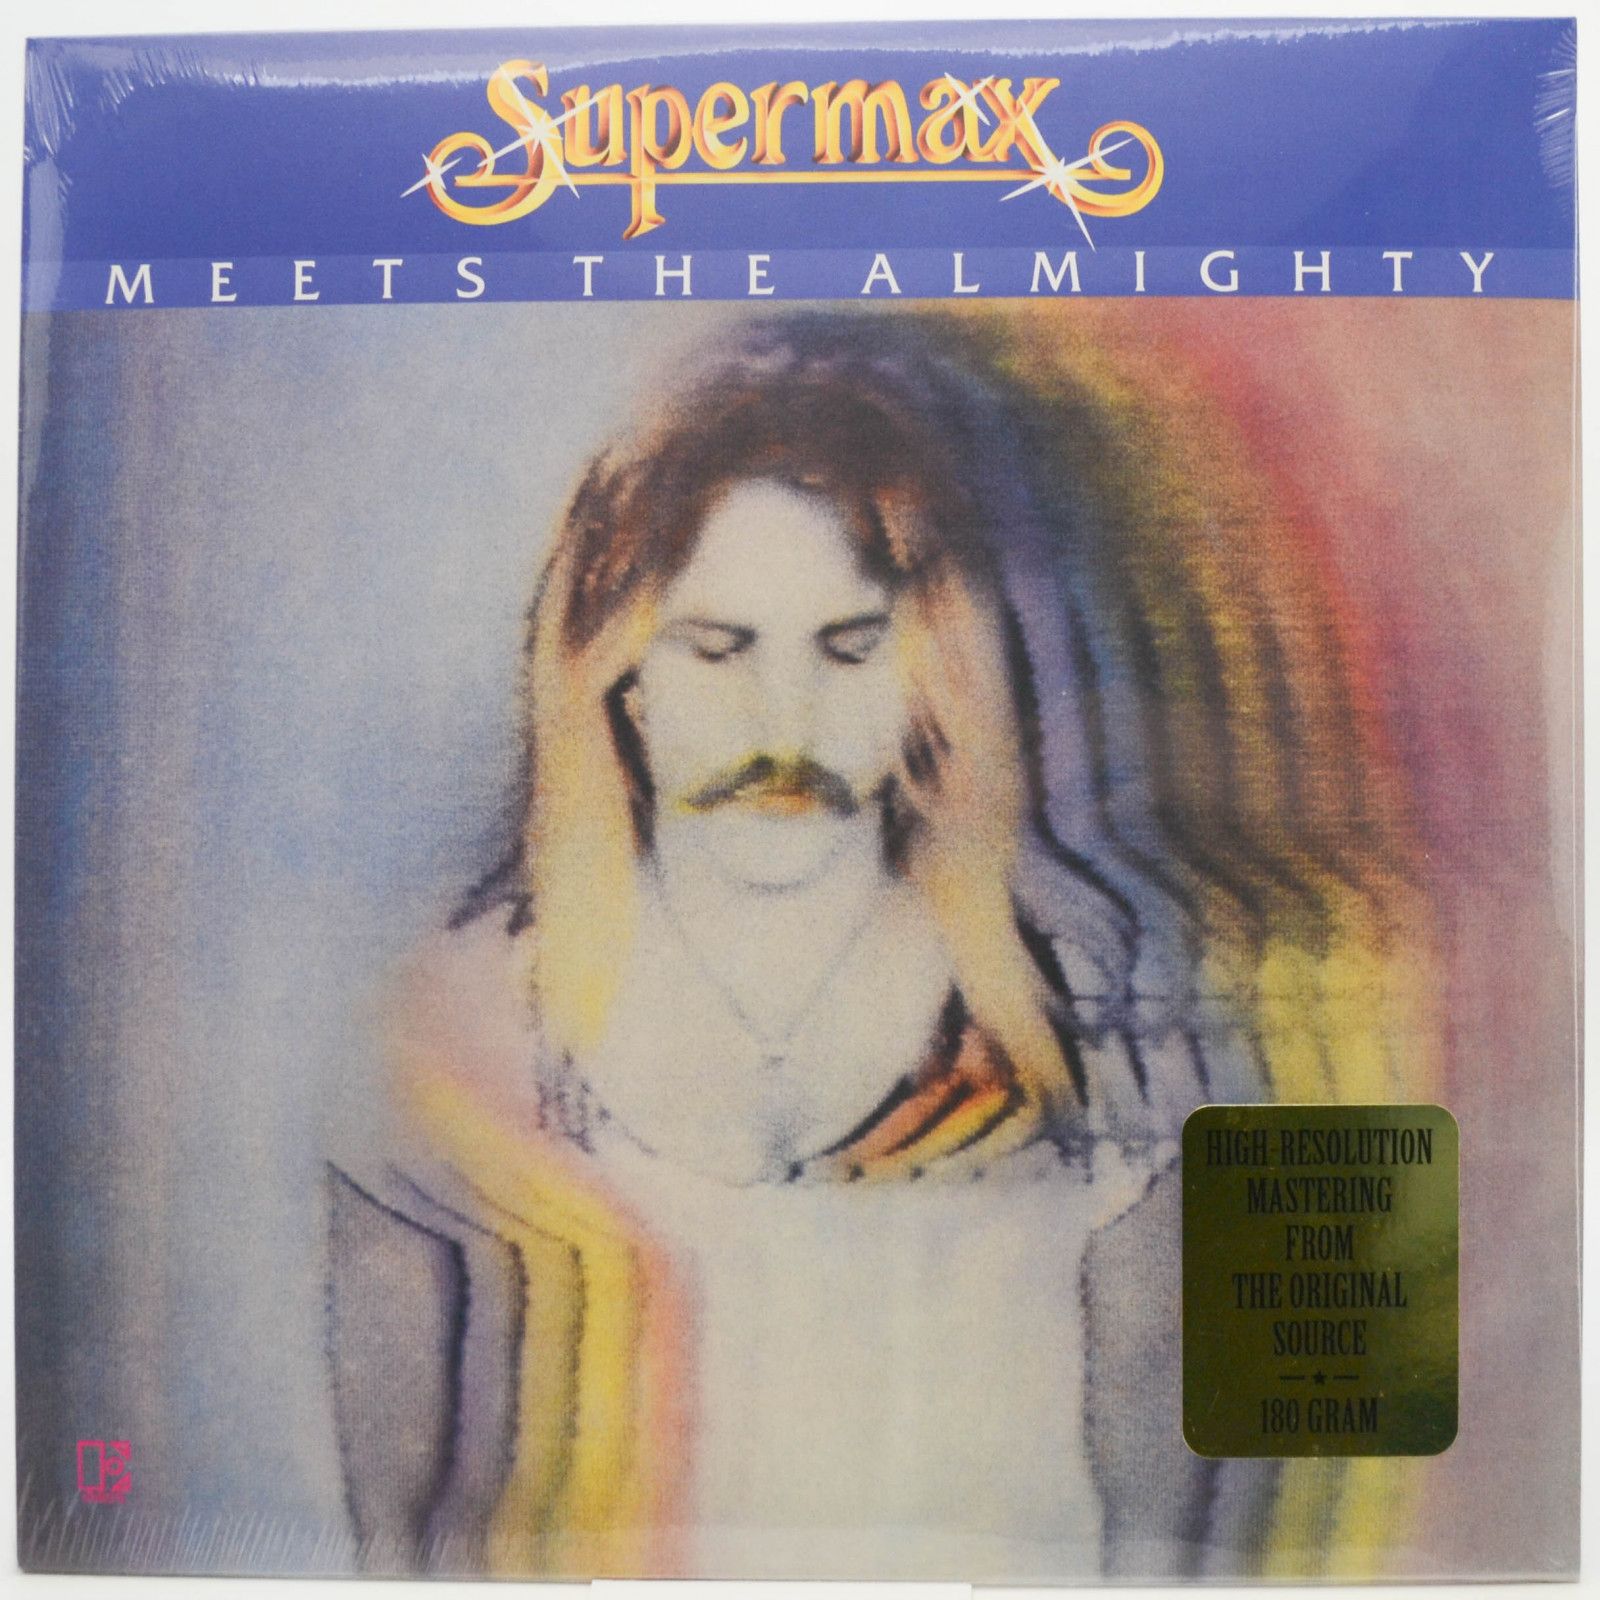 Supermax — Supermax Meets The Almighty, 1981